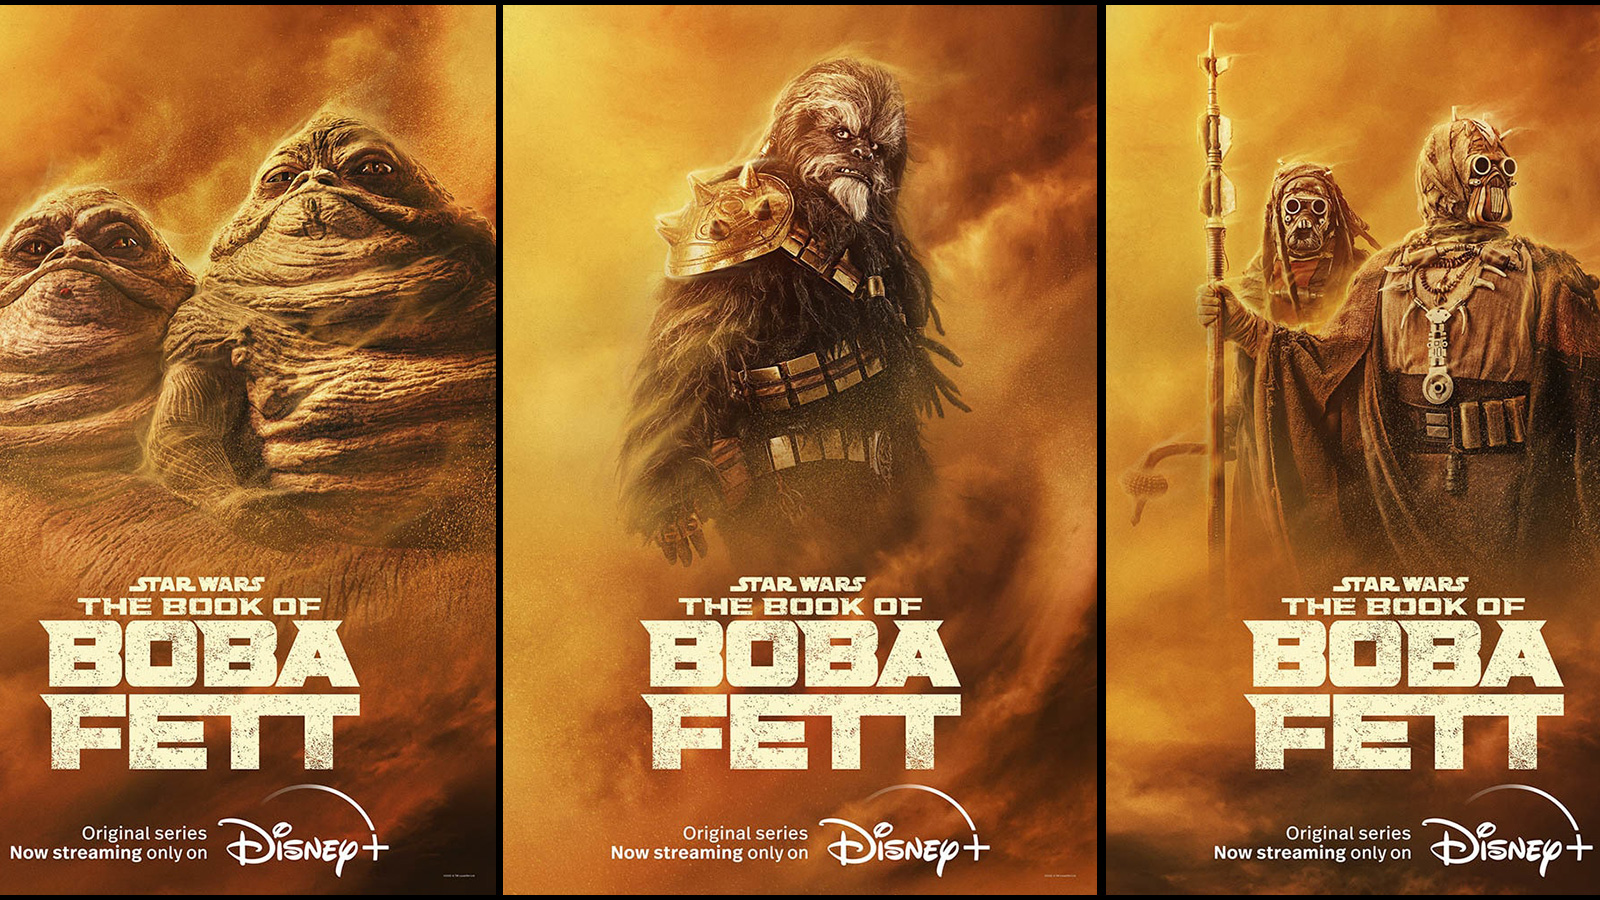 The Book of Boba Fett’ Chapter 2 “The Tribes of Tatooine” Character Posters